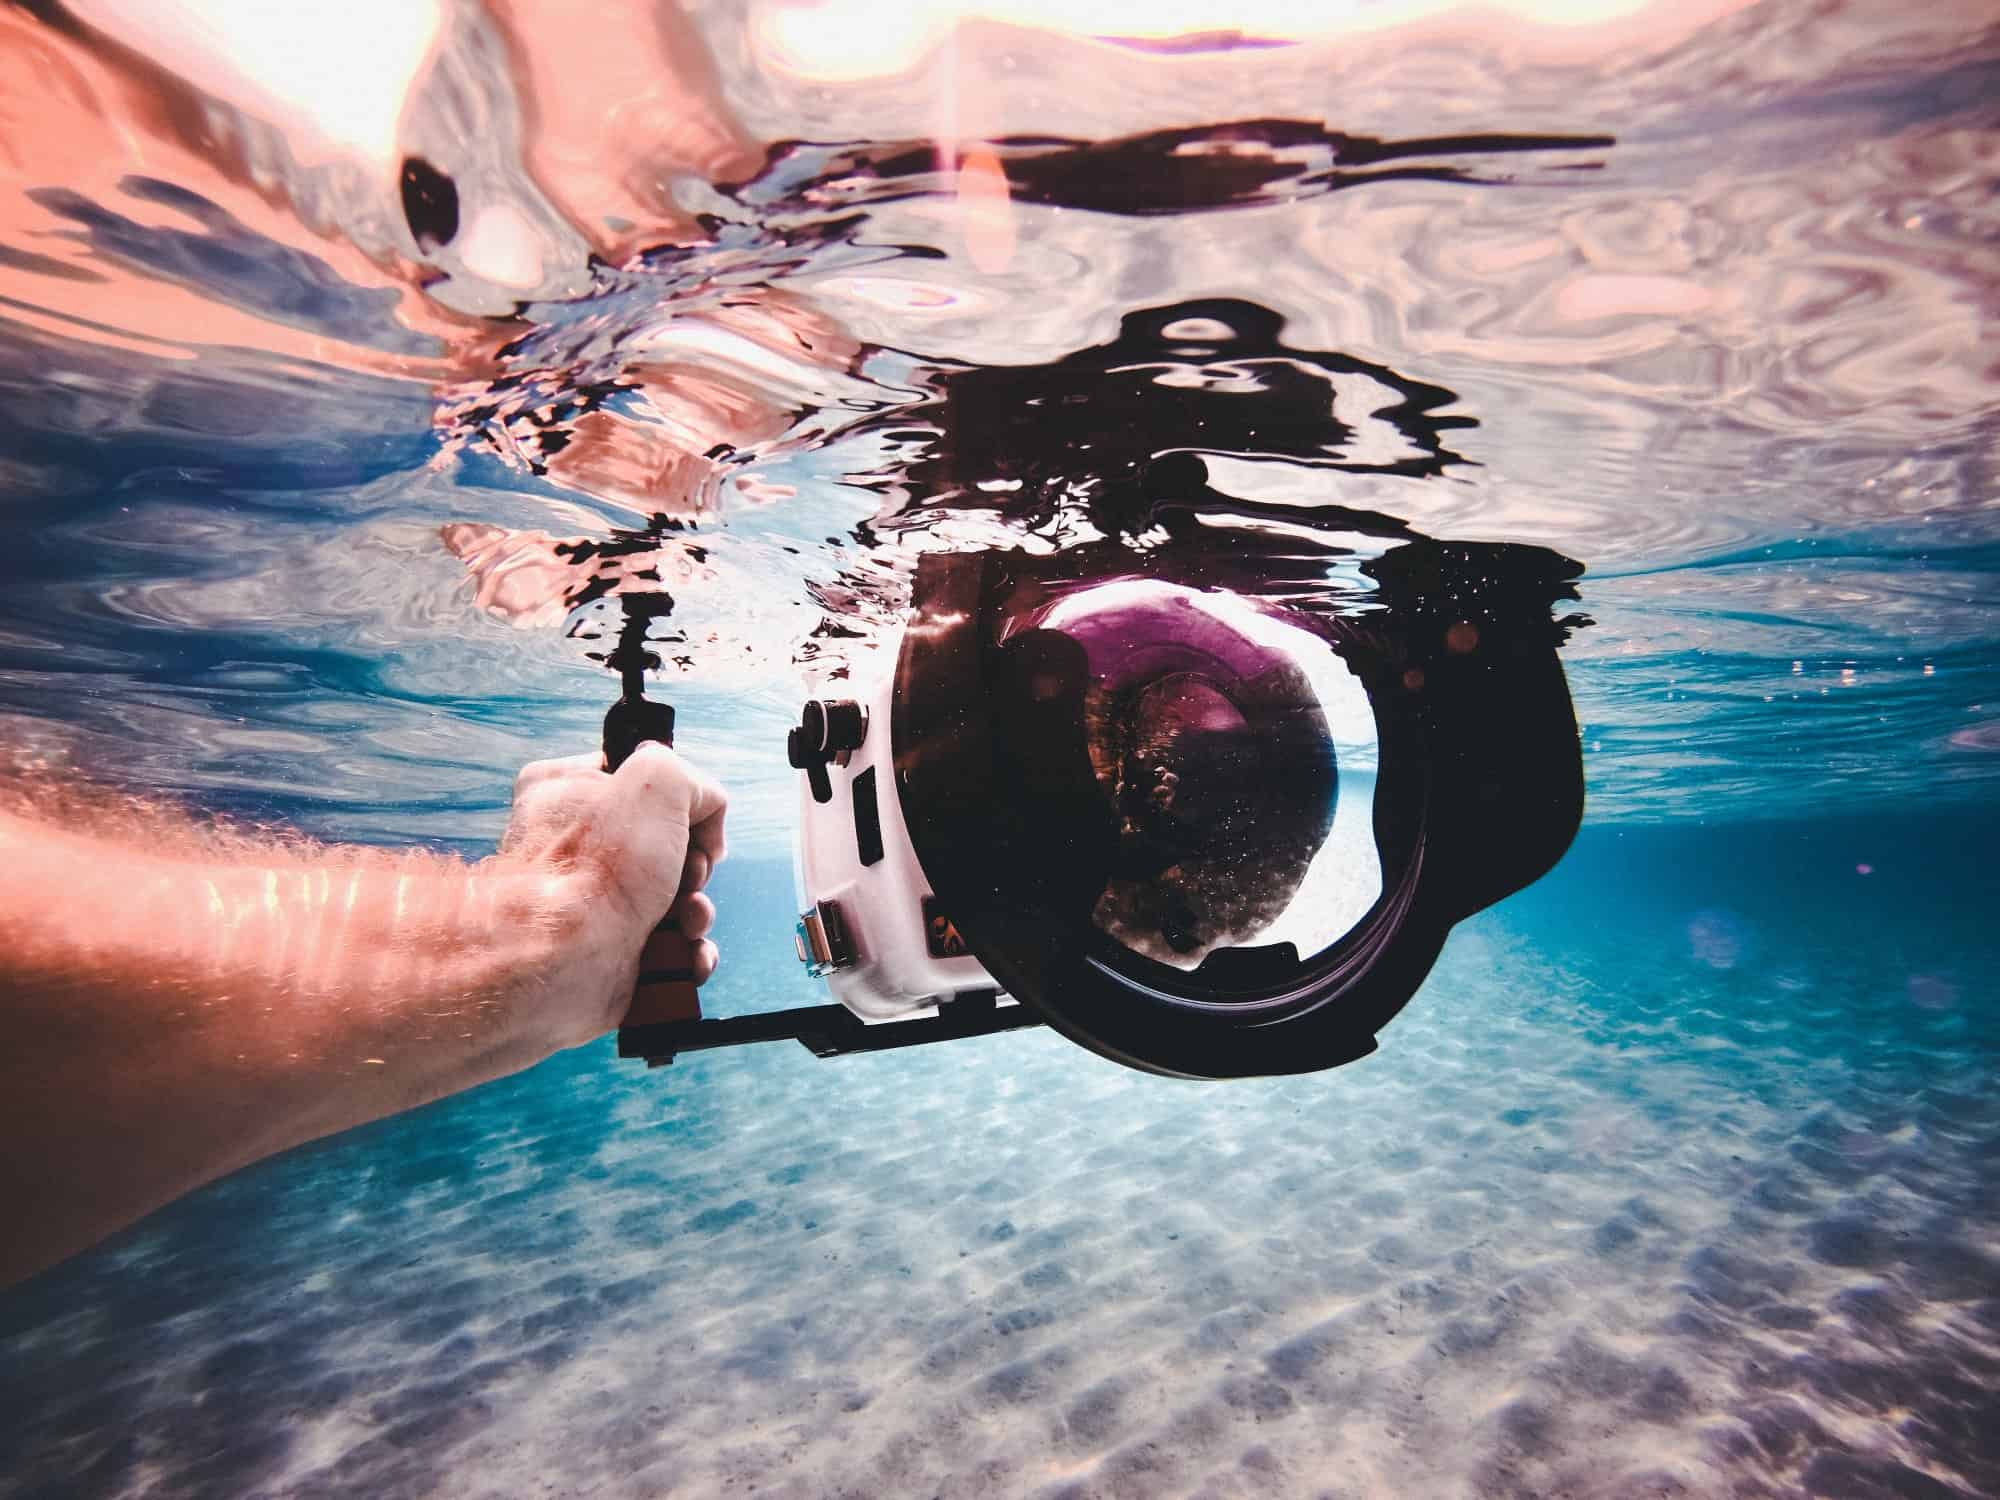 How To Take Swimming Pictures With A DSLR Camera